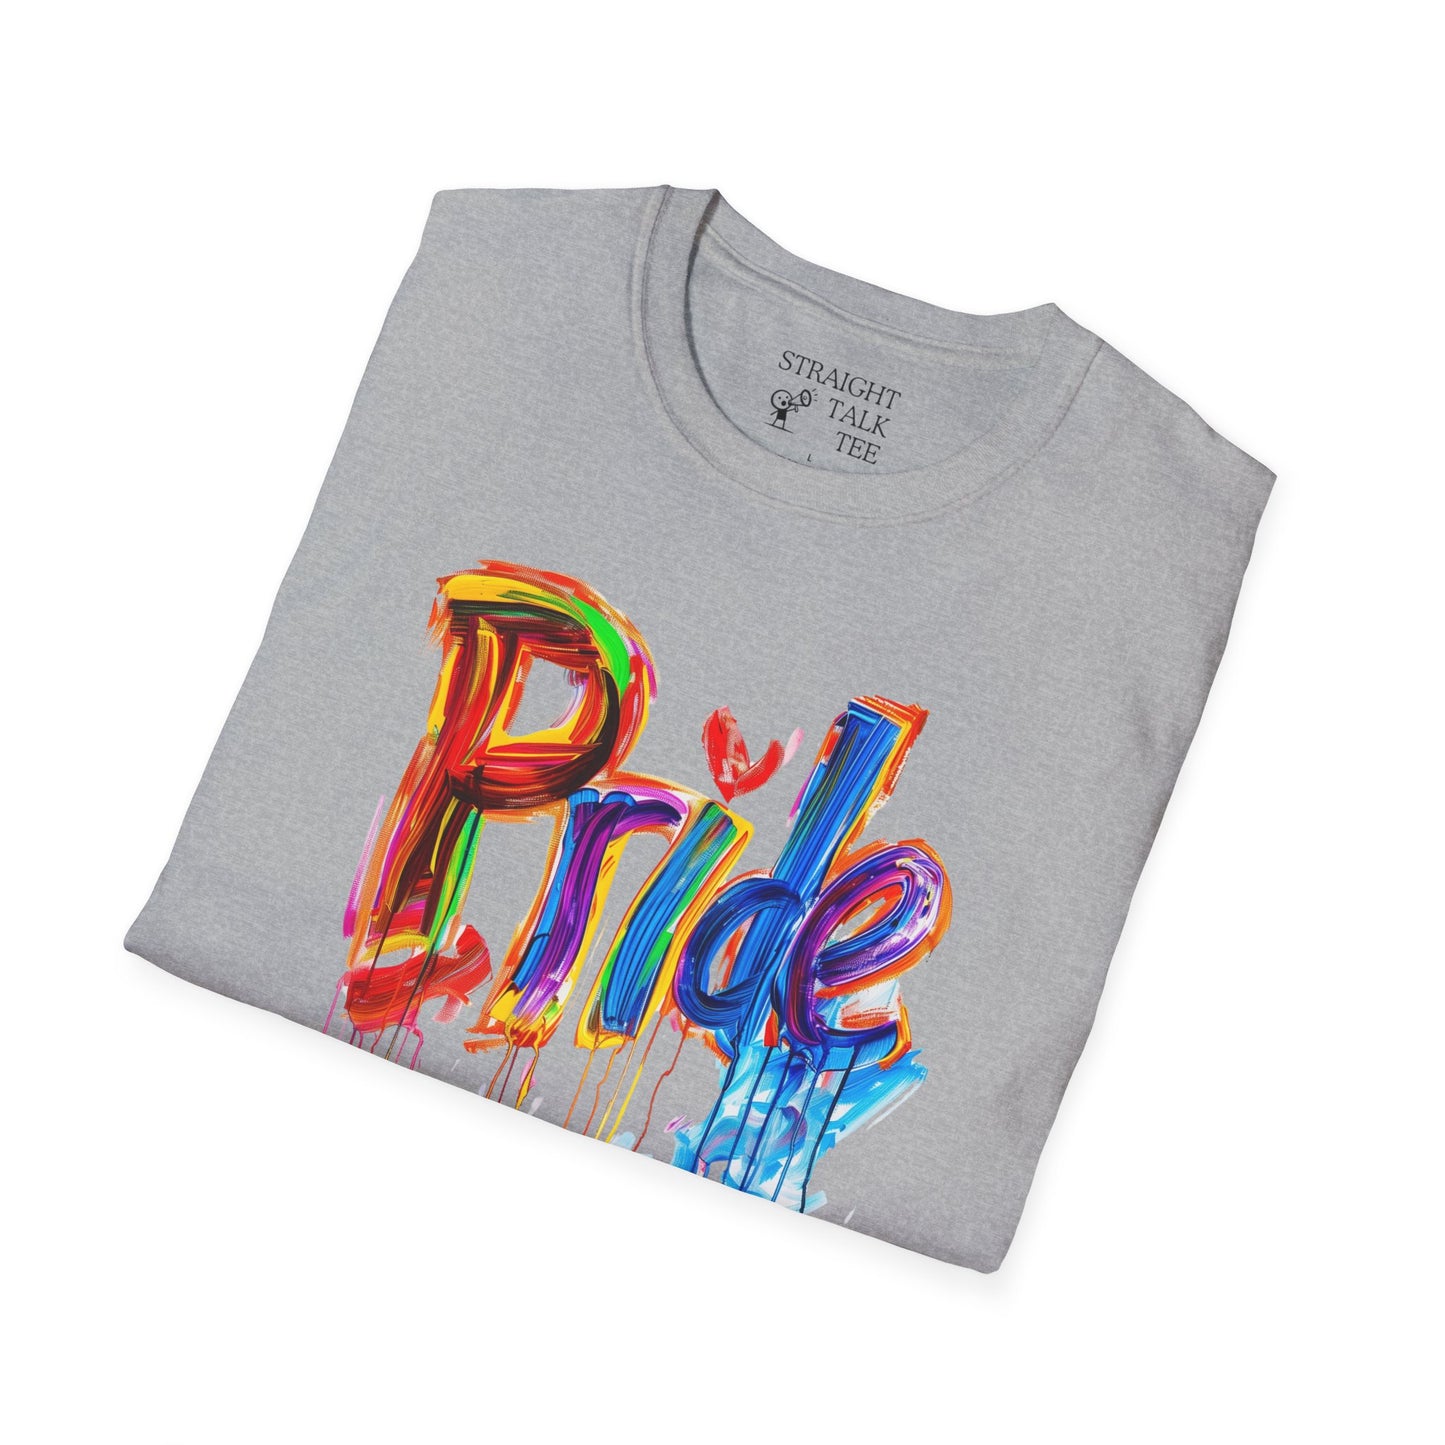 Pride in Full Color T-Shirt Proud Statement Shirt! Live With Pride!